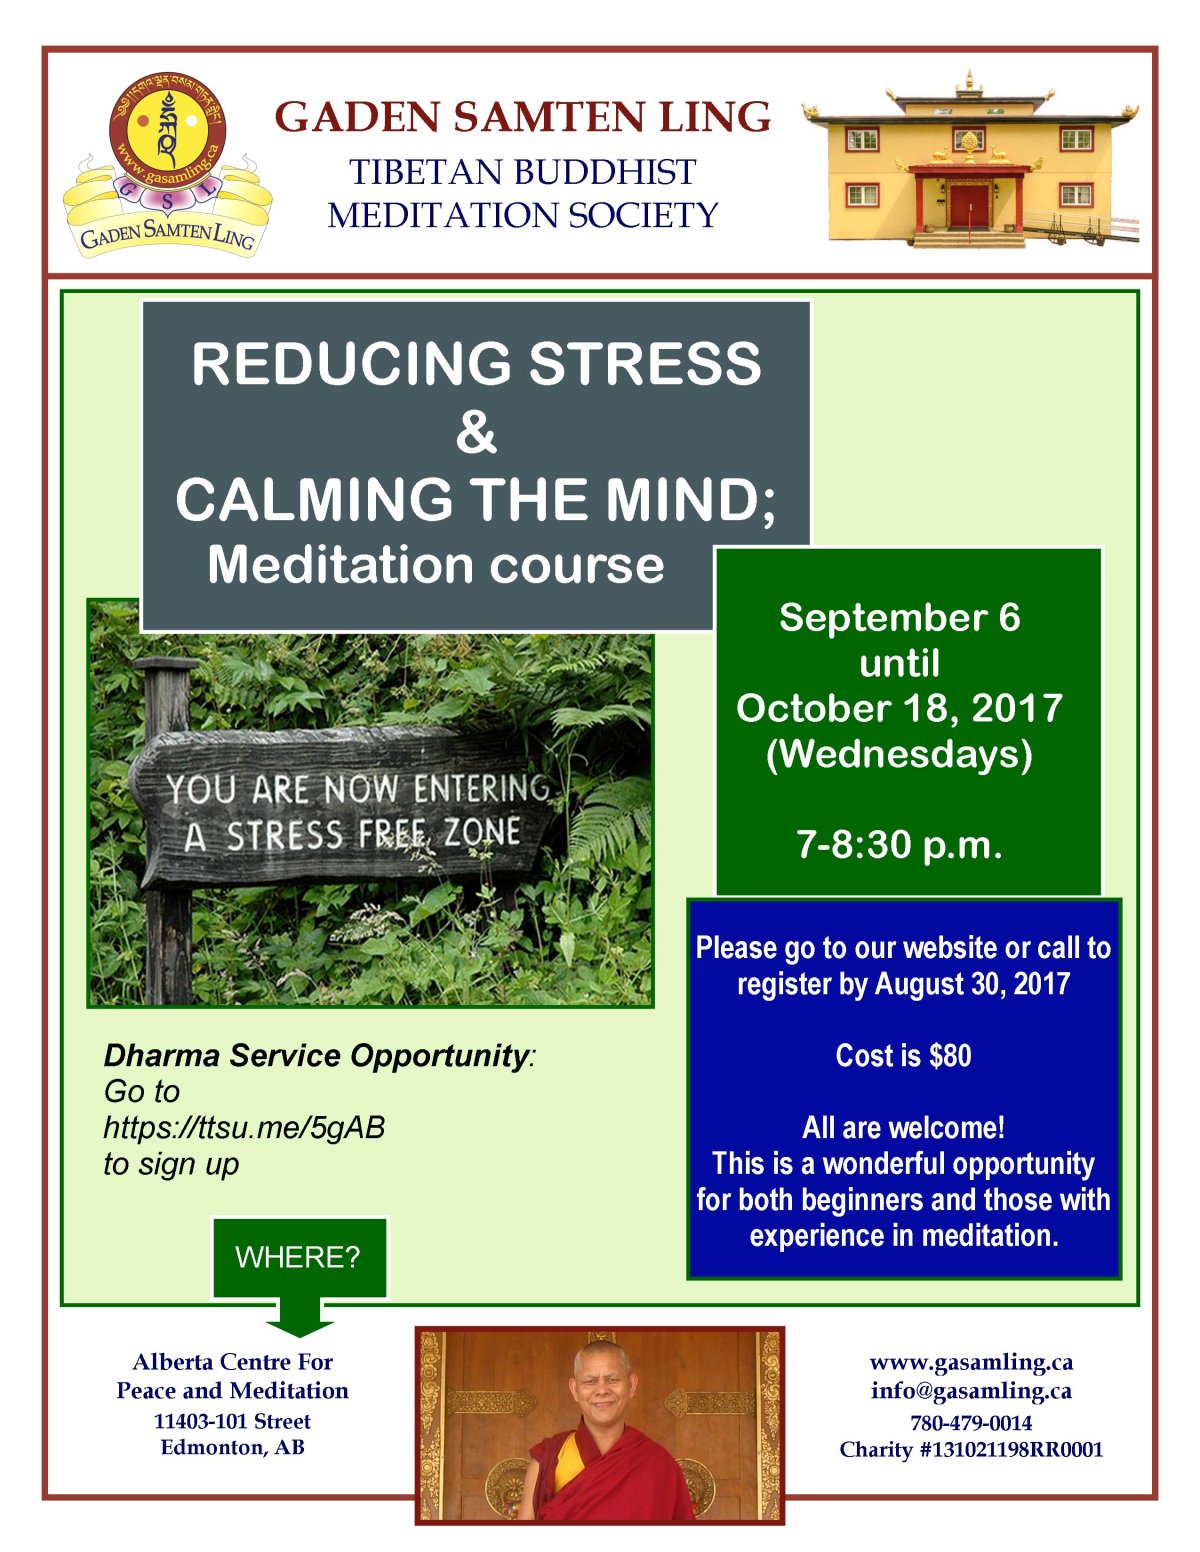 Reducing Stress and Calming the Mind - image